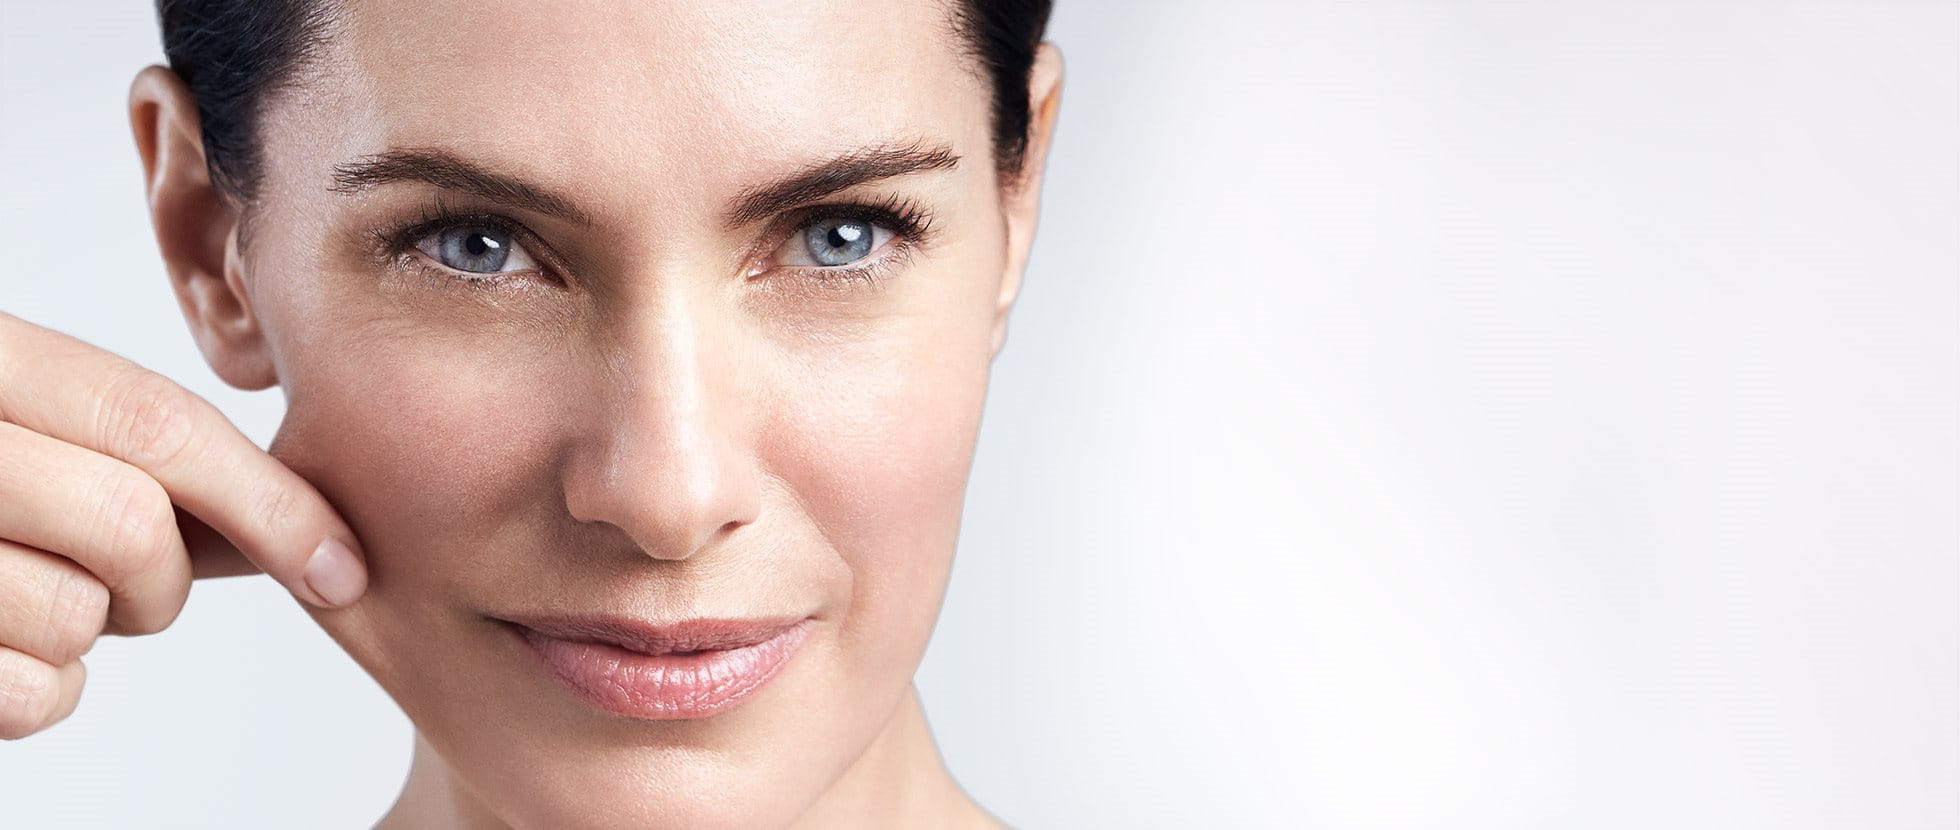 How to Get Rid of Wrinkles And Reduce Face Aging Premature?